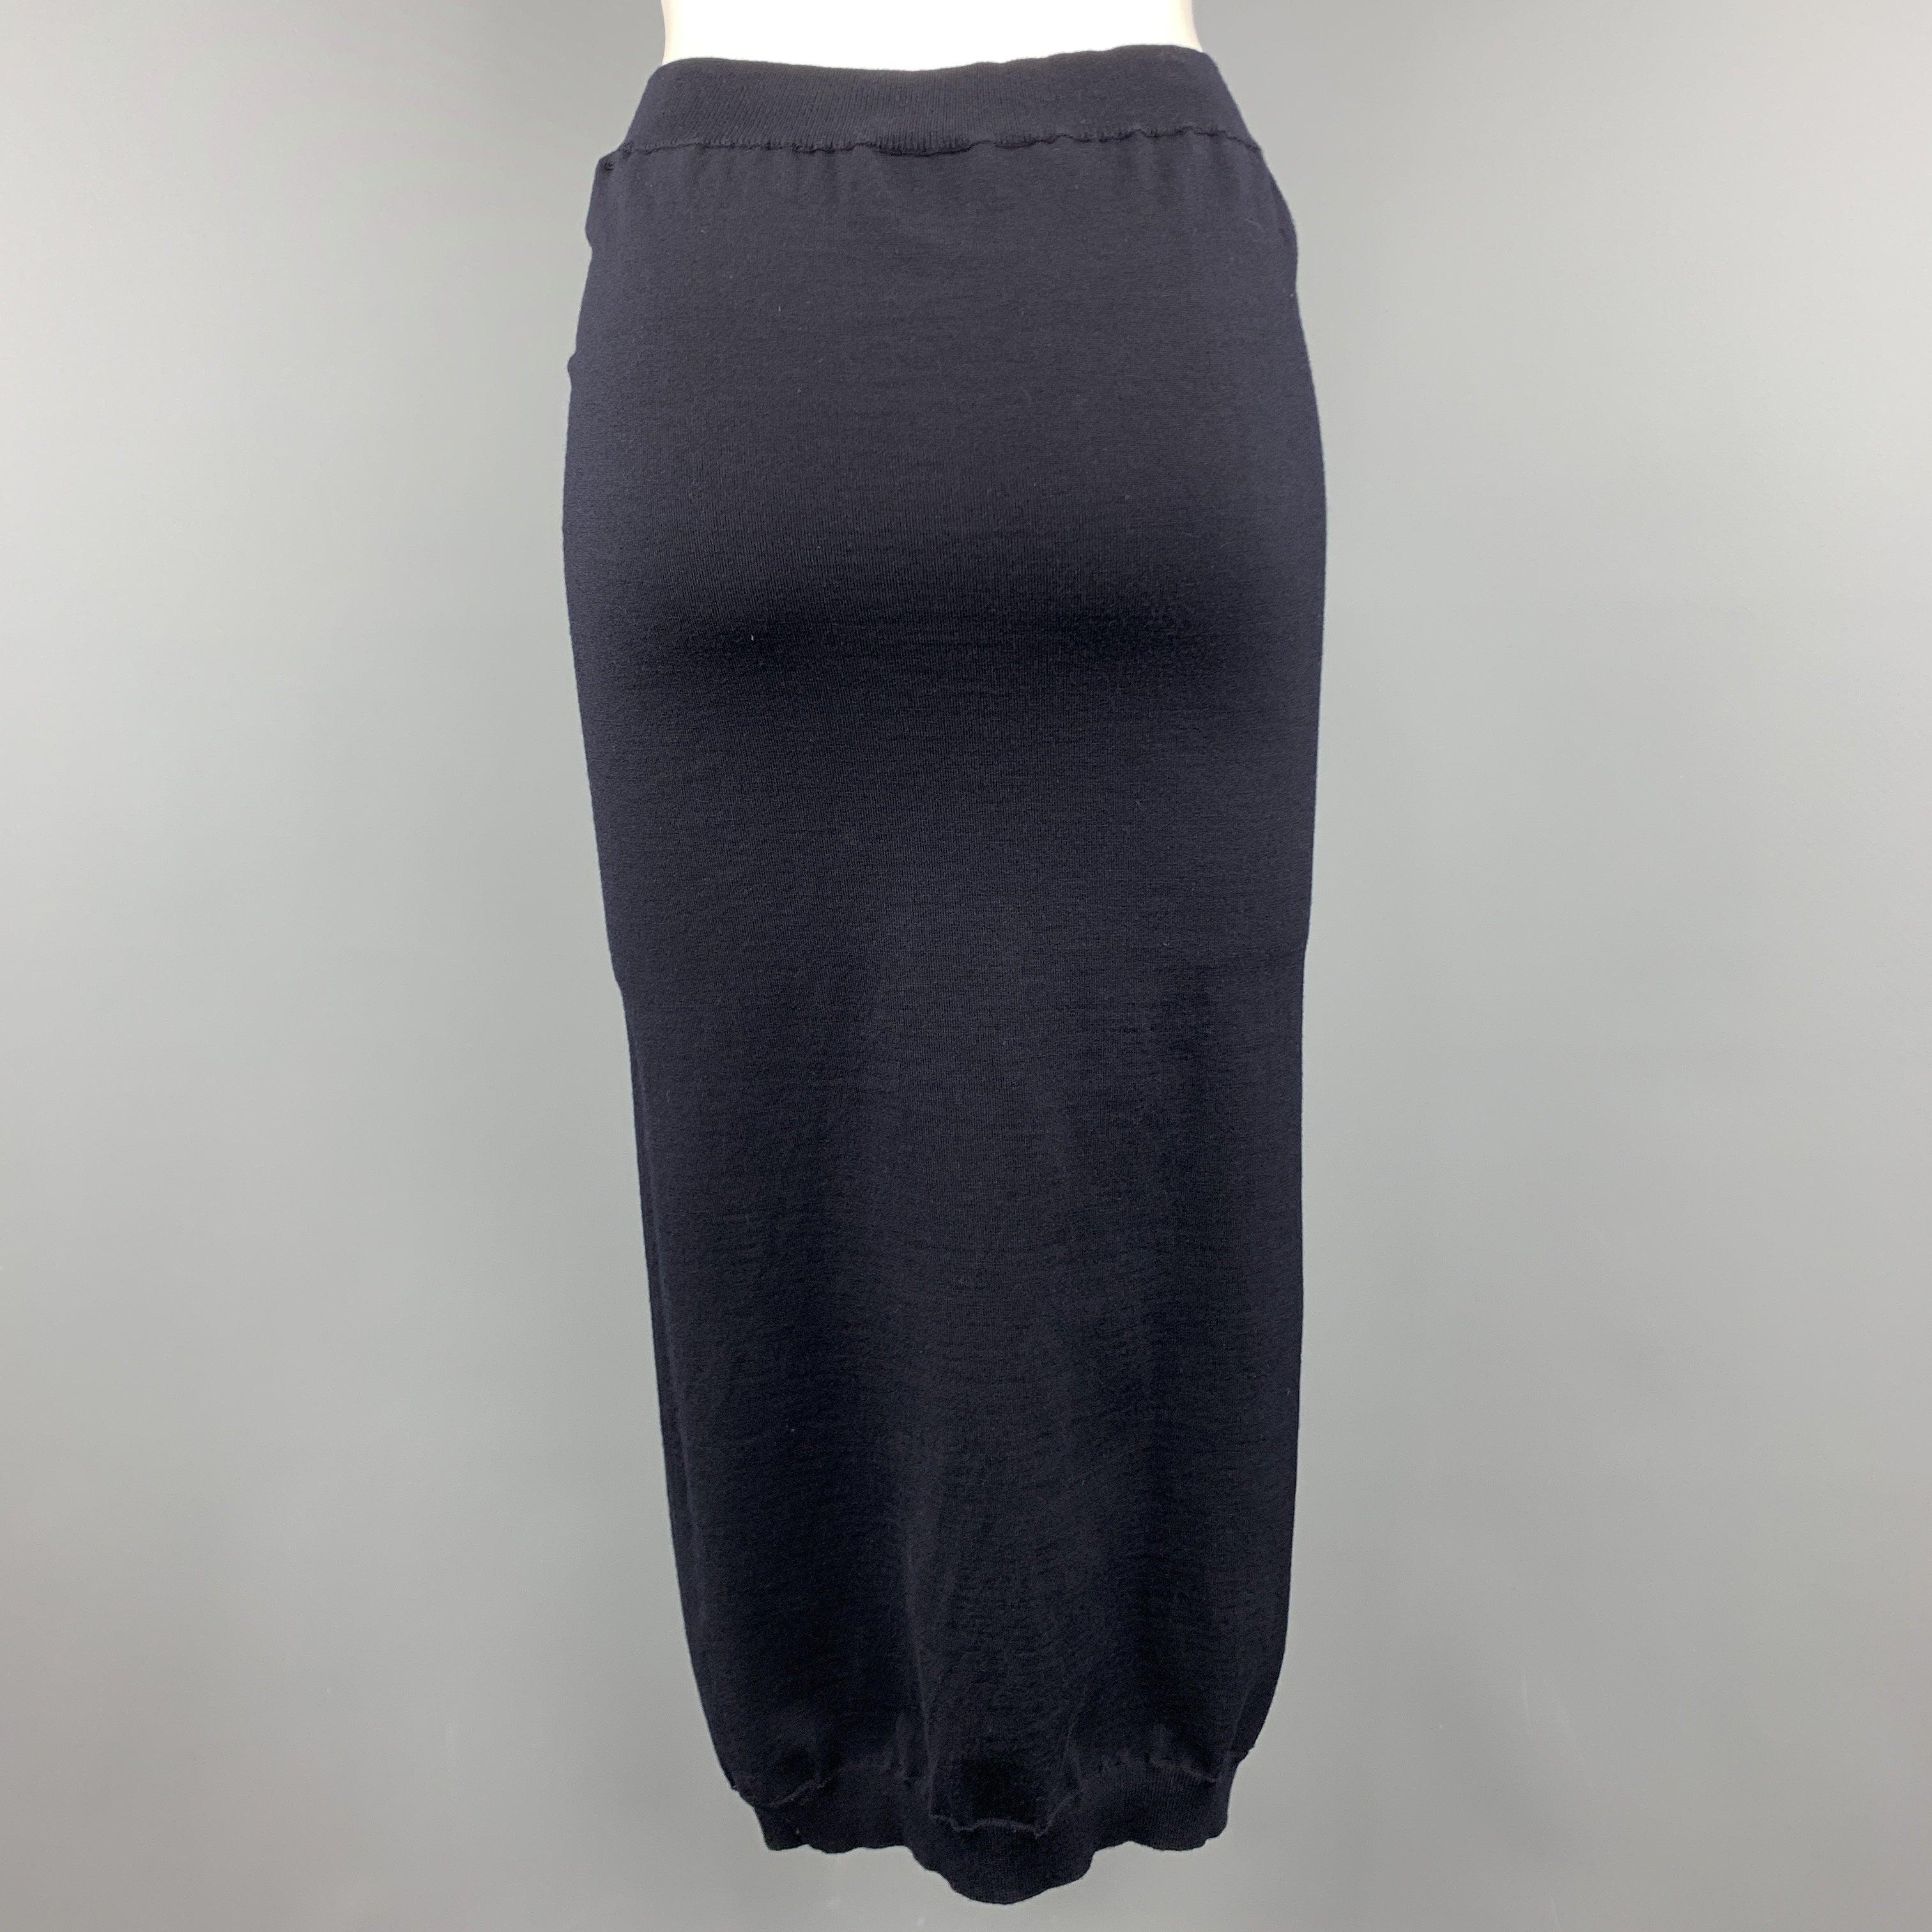 GOLDEN GOOSE Size M Navy Merino Wool Blend Pencil Skirt In Excellent Condition For Sale In San Francisco, CA